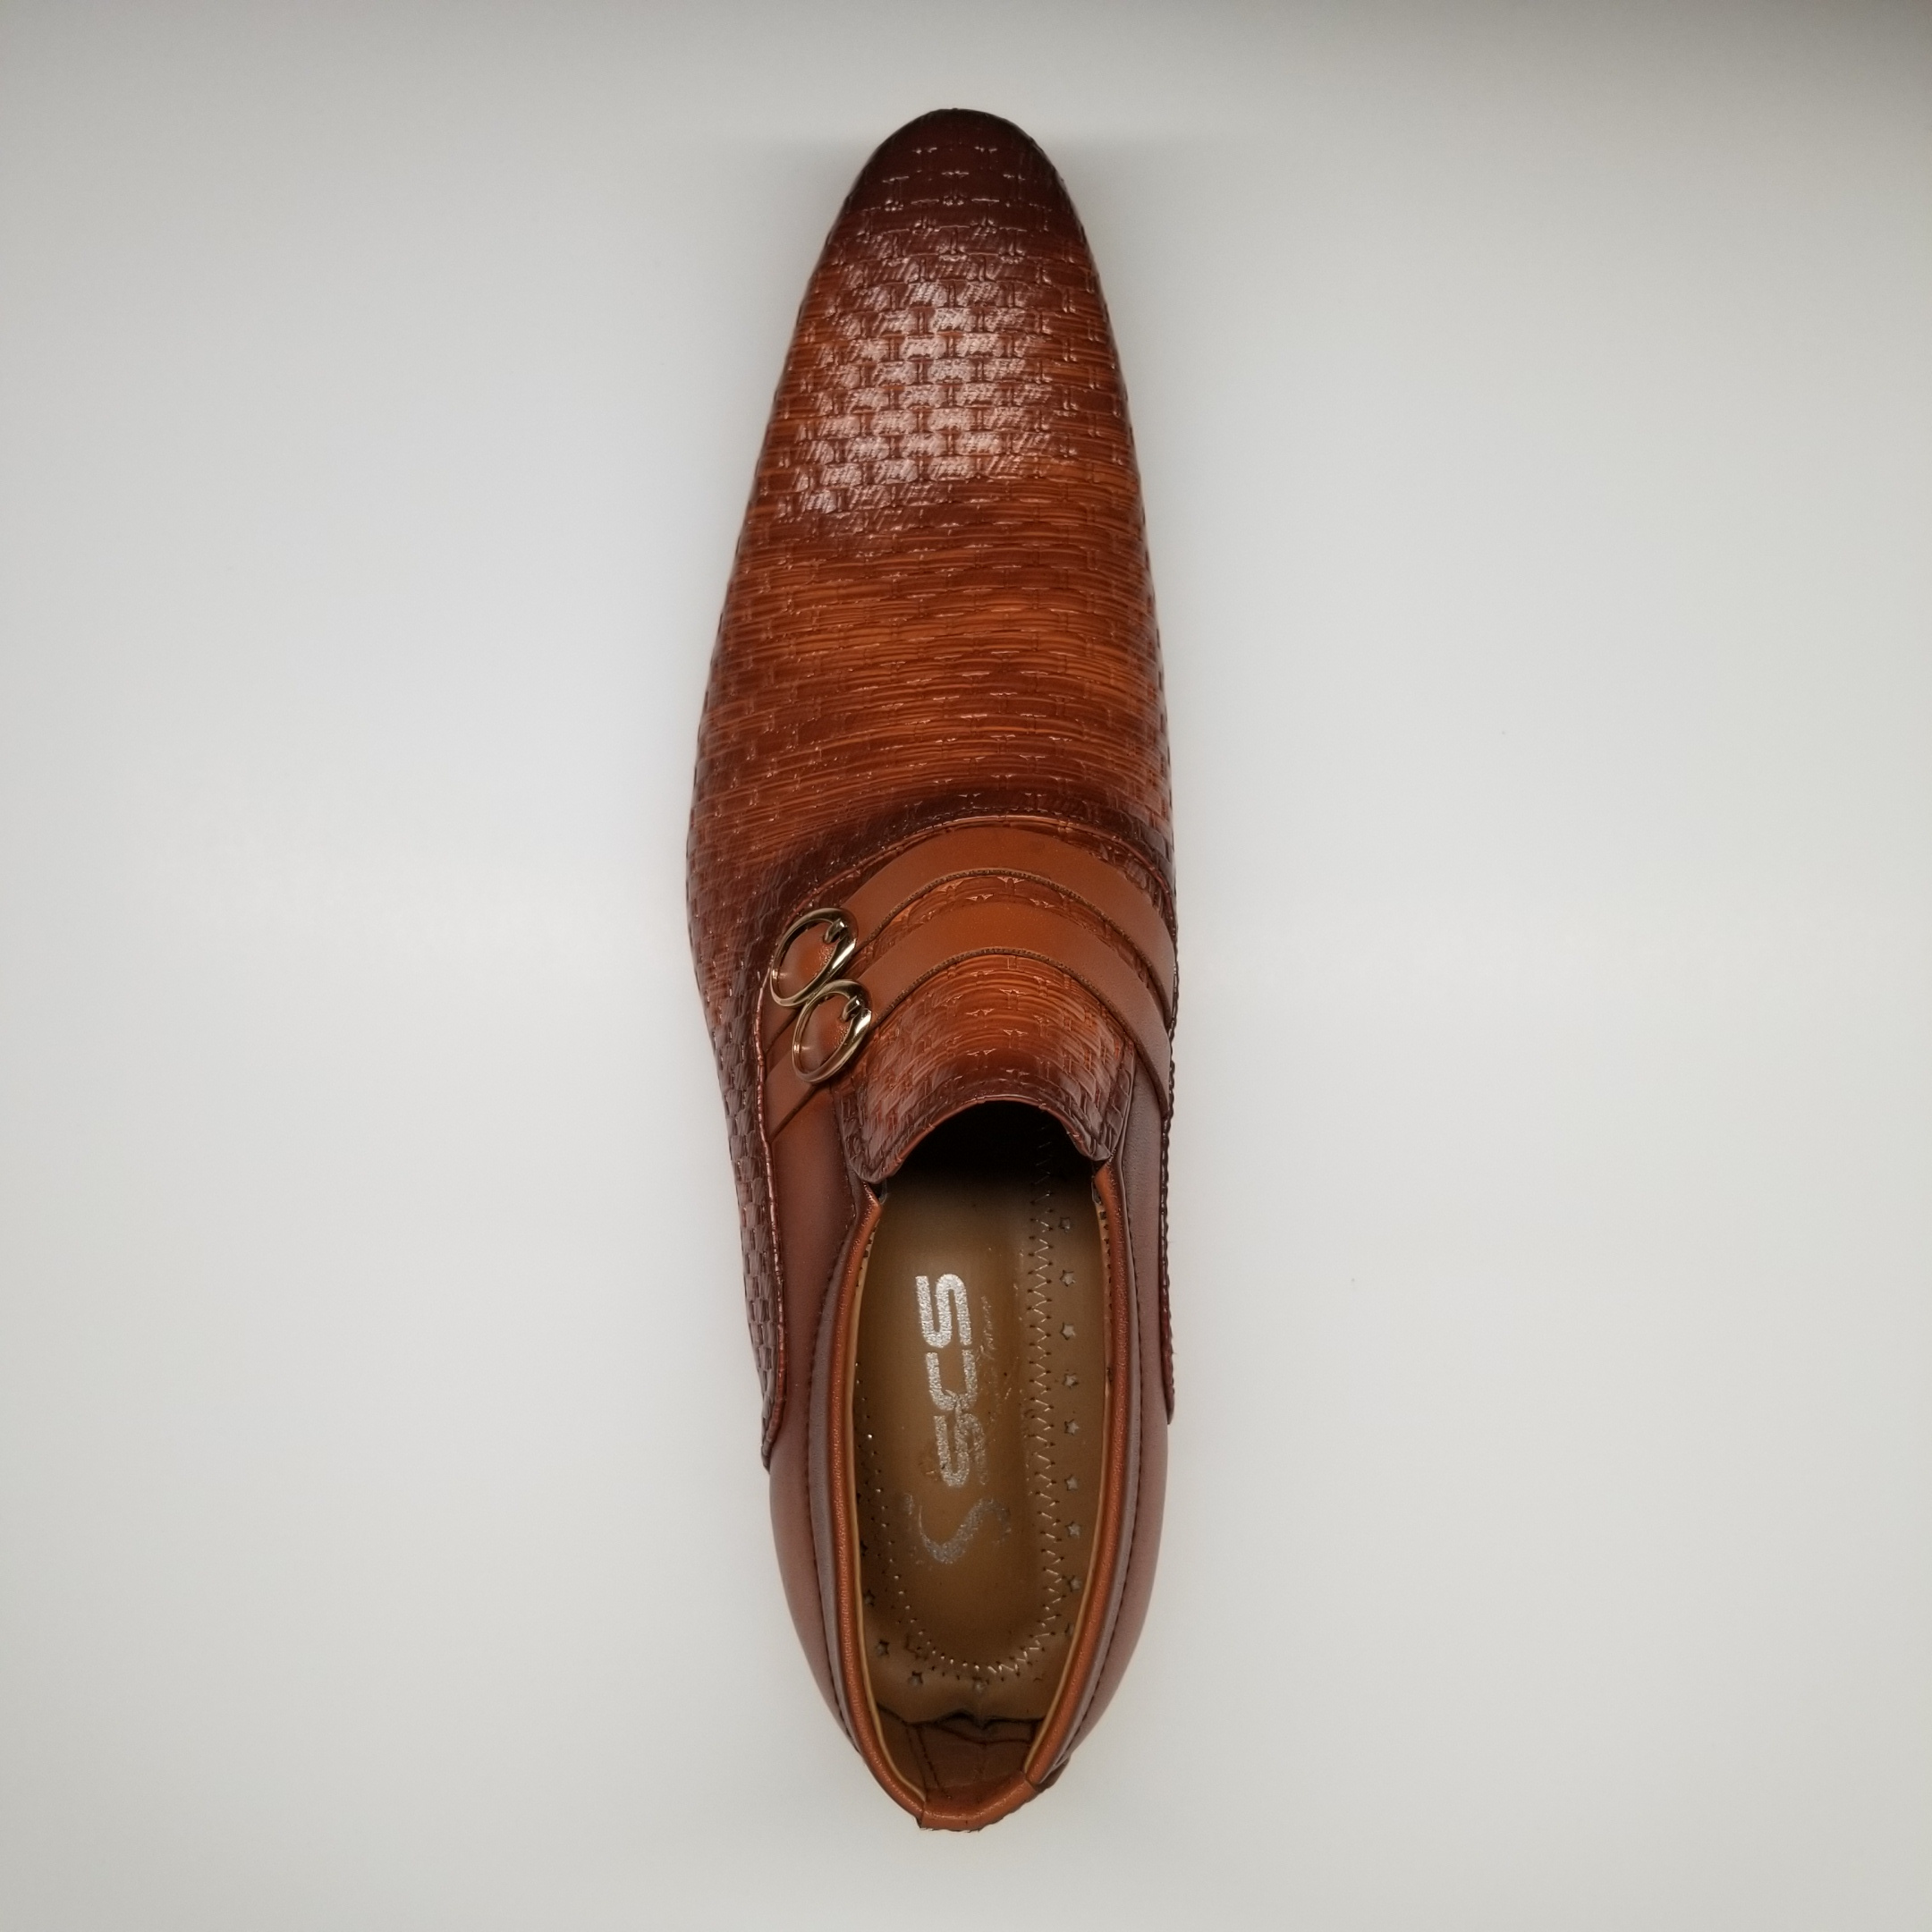 Stature dress shoes by SCS at NMFootwear.com